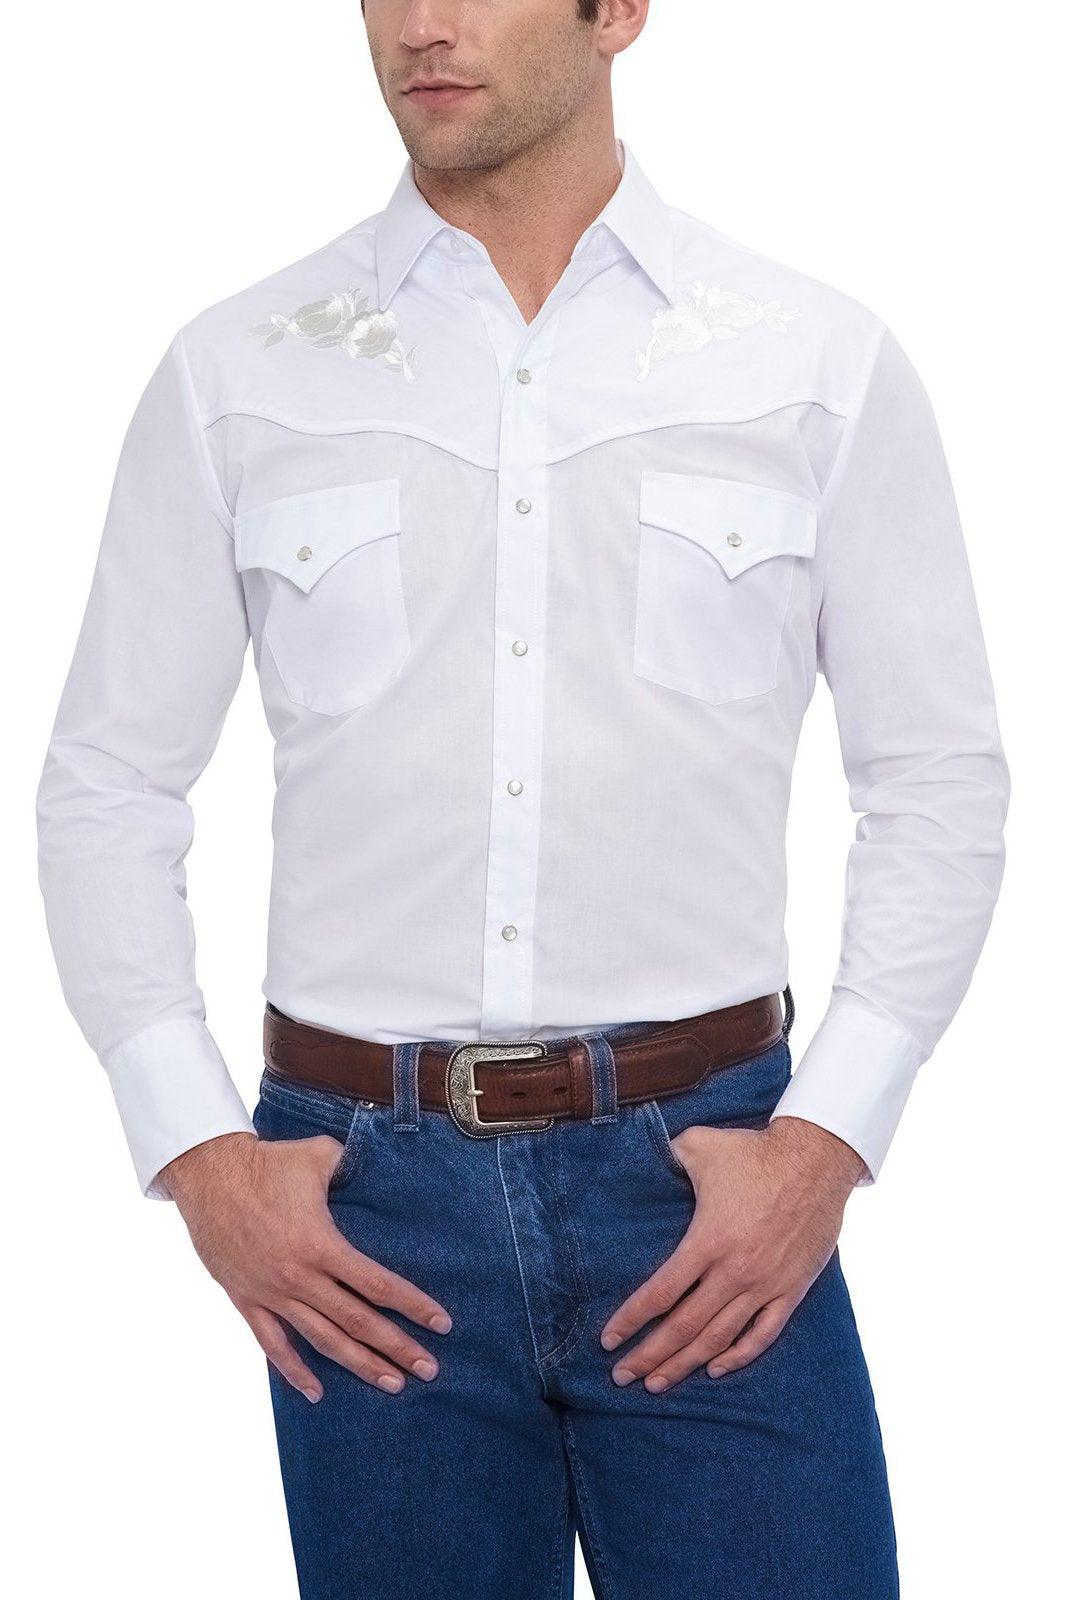 Ely Cattleman Mens L/S White Solid Shirt with white embroidered roses - Flyclothing LLC